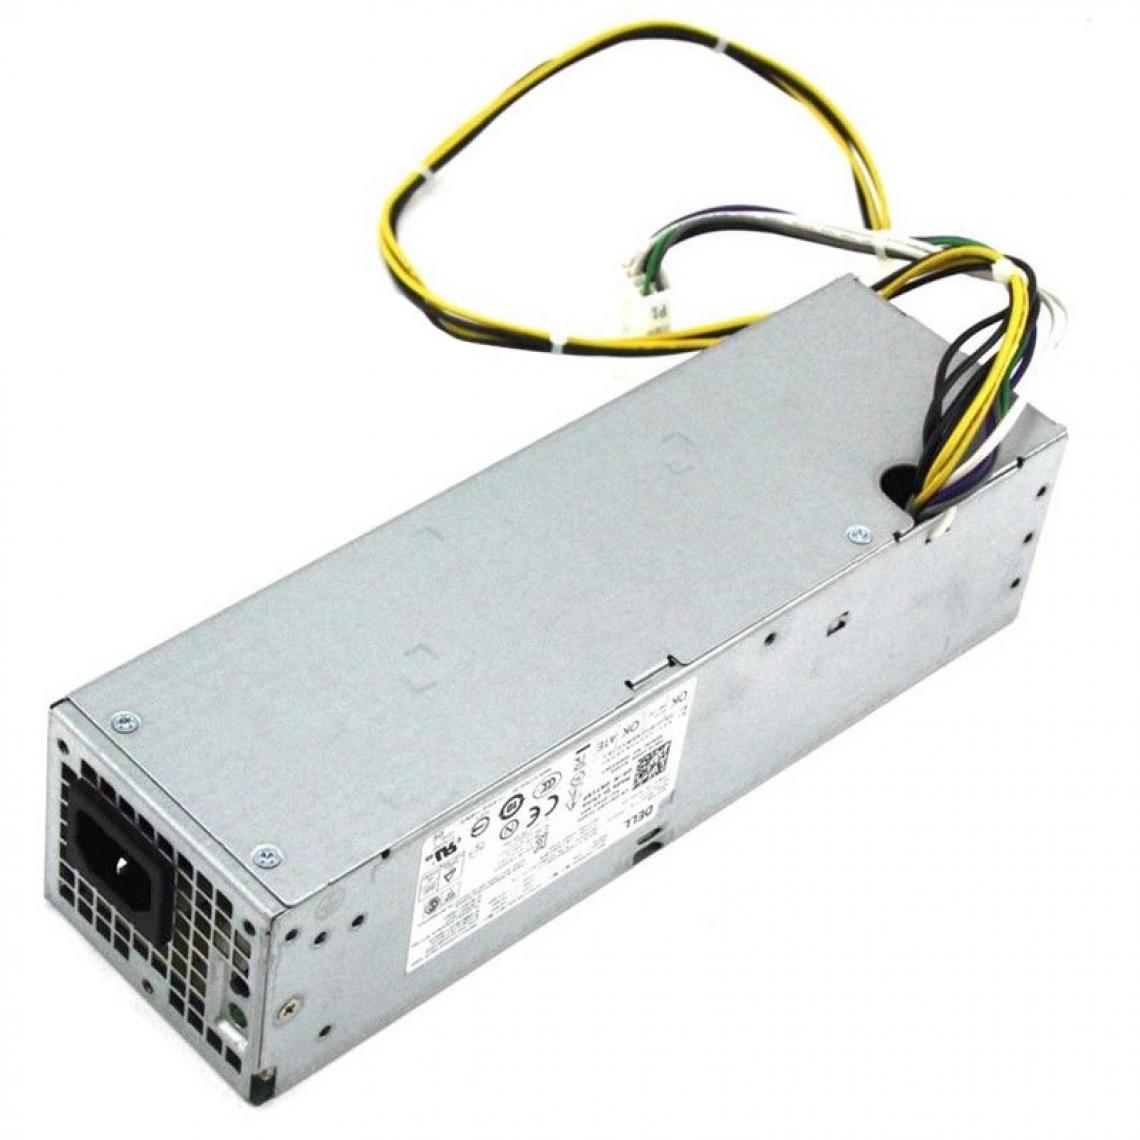 Dell - Alimentation DELL Optiplex 9020 SFF L255AS-00 PS-3261-2DF 0NT1XP 255W Power Supply - Alimentation modulaire